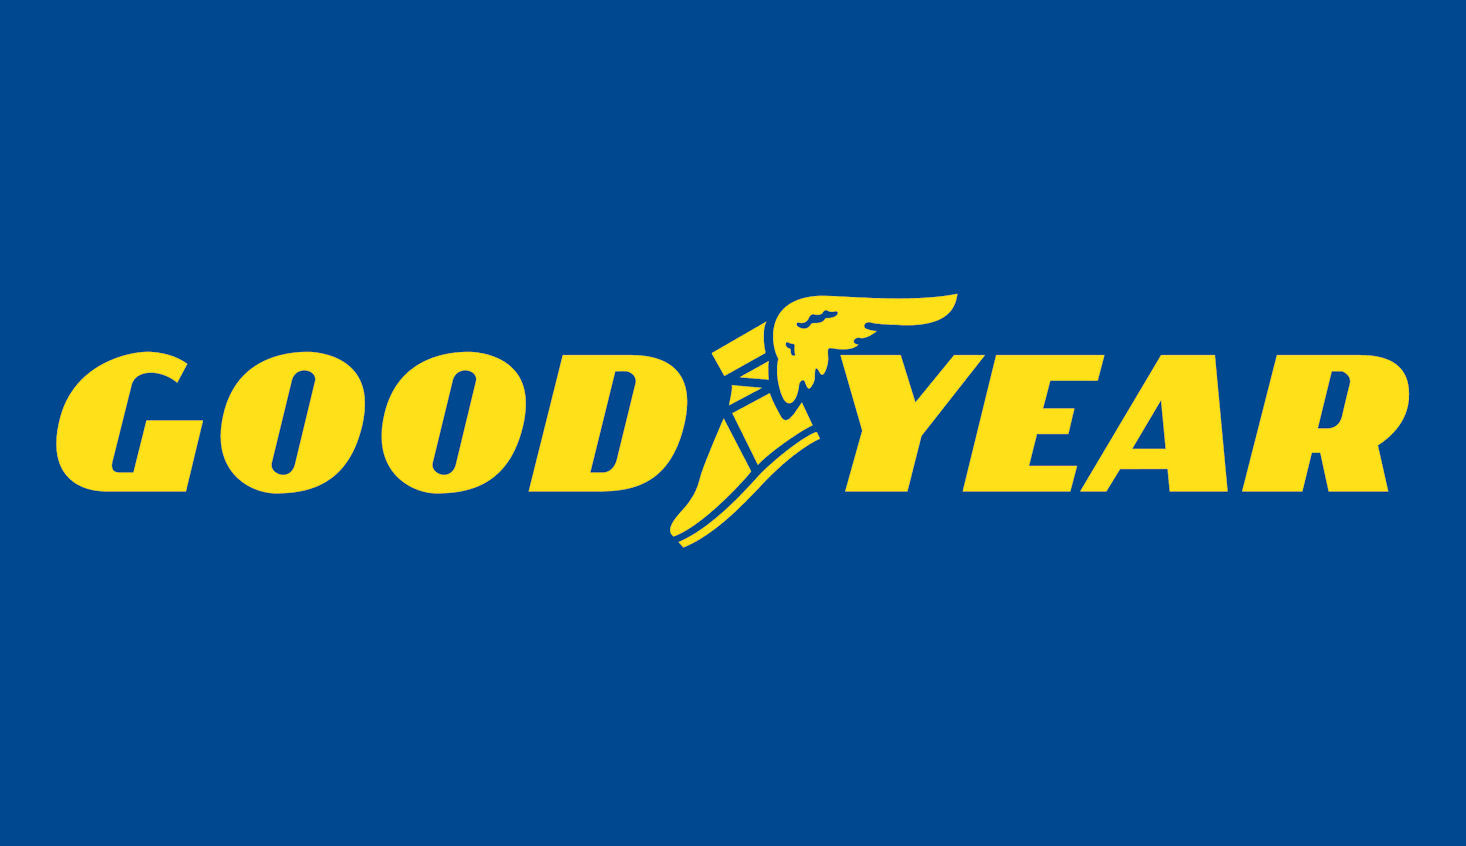 Goodyear: volumes up in Q1 2016, operating margin grows to 11.4%